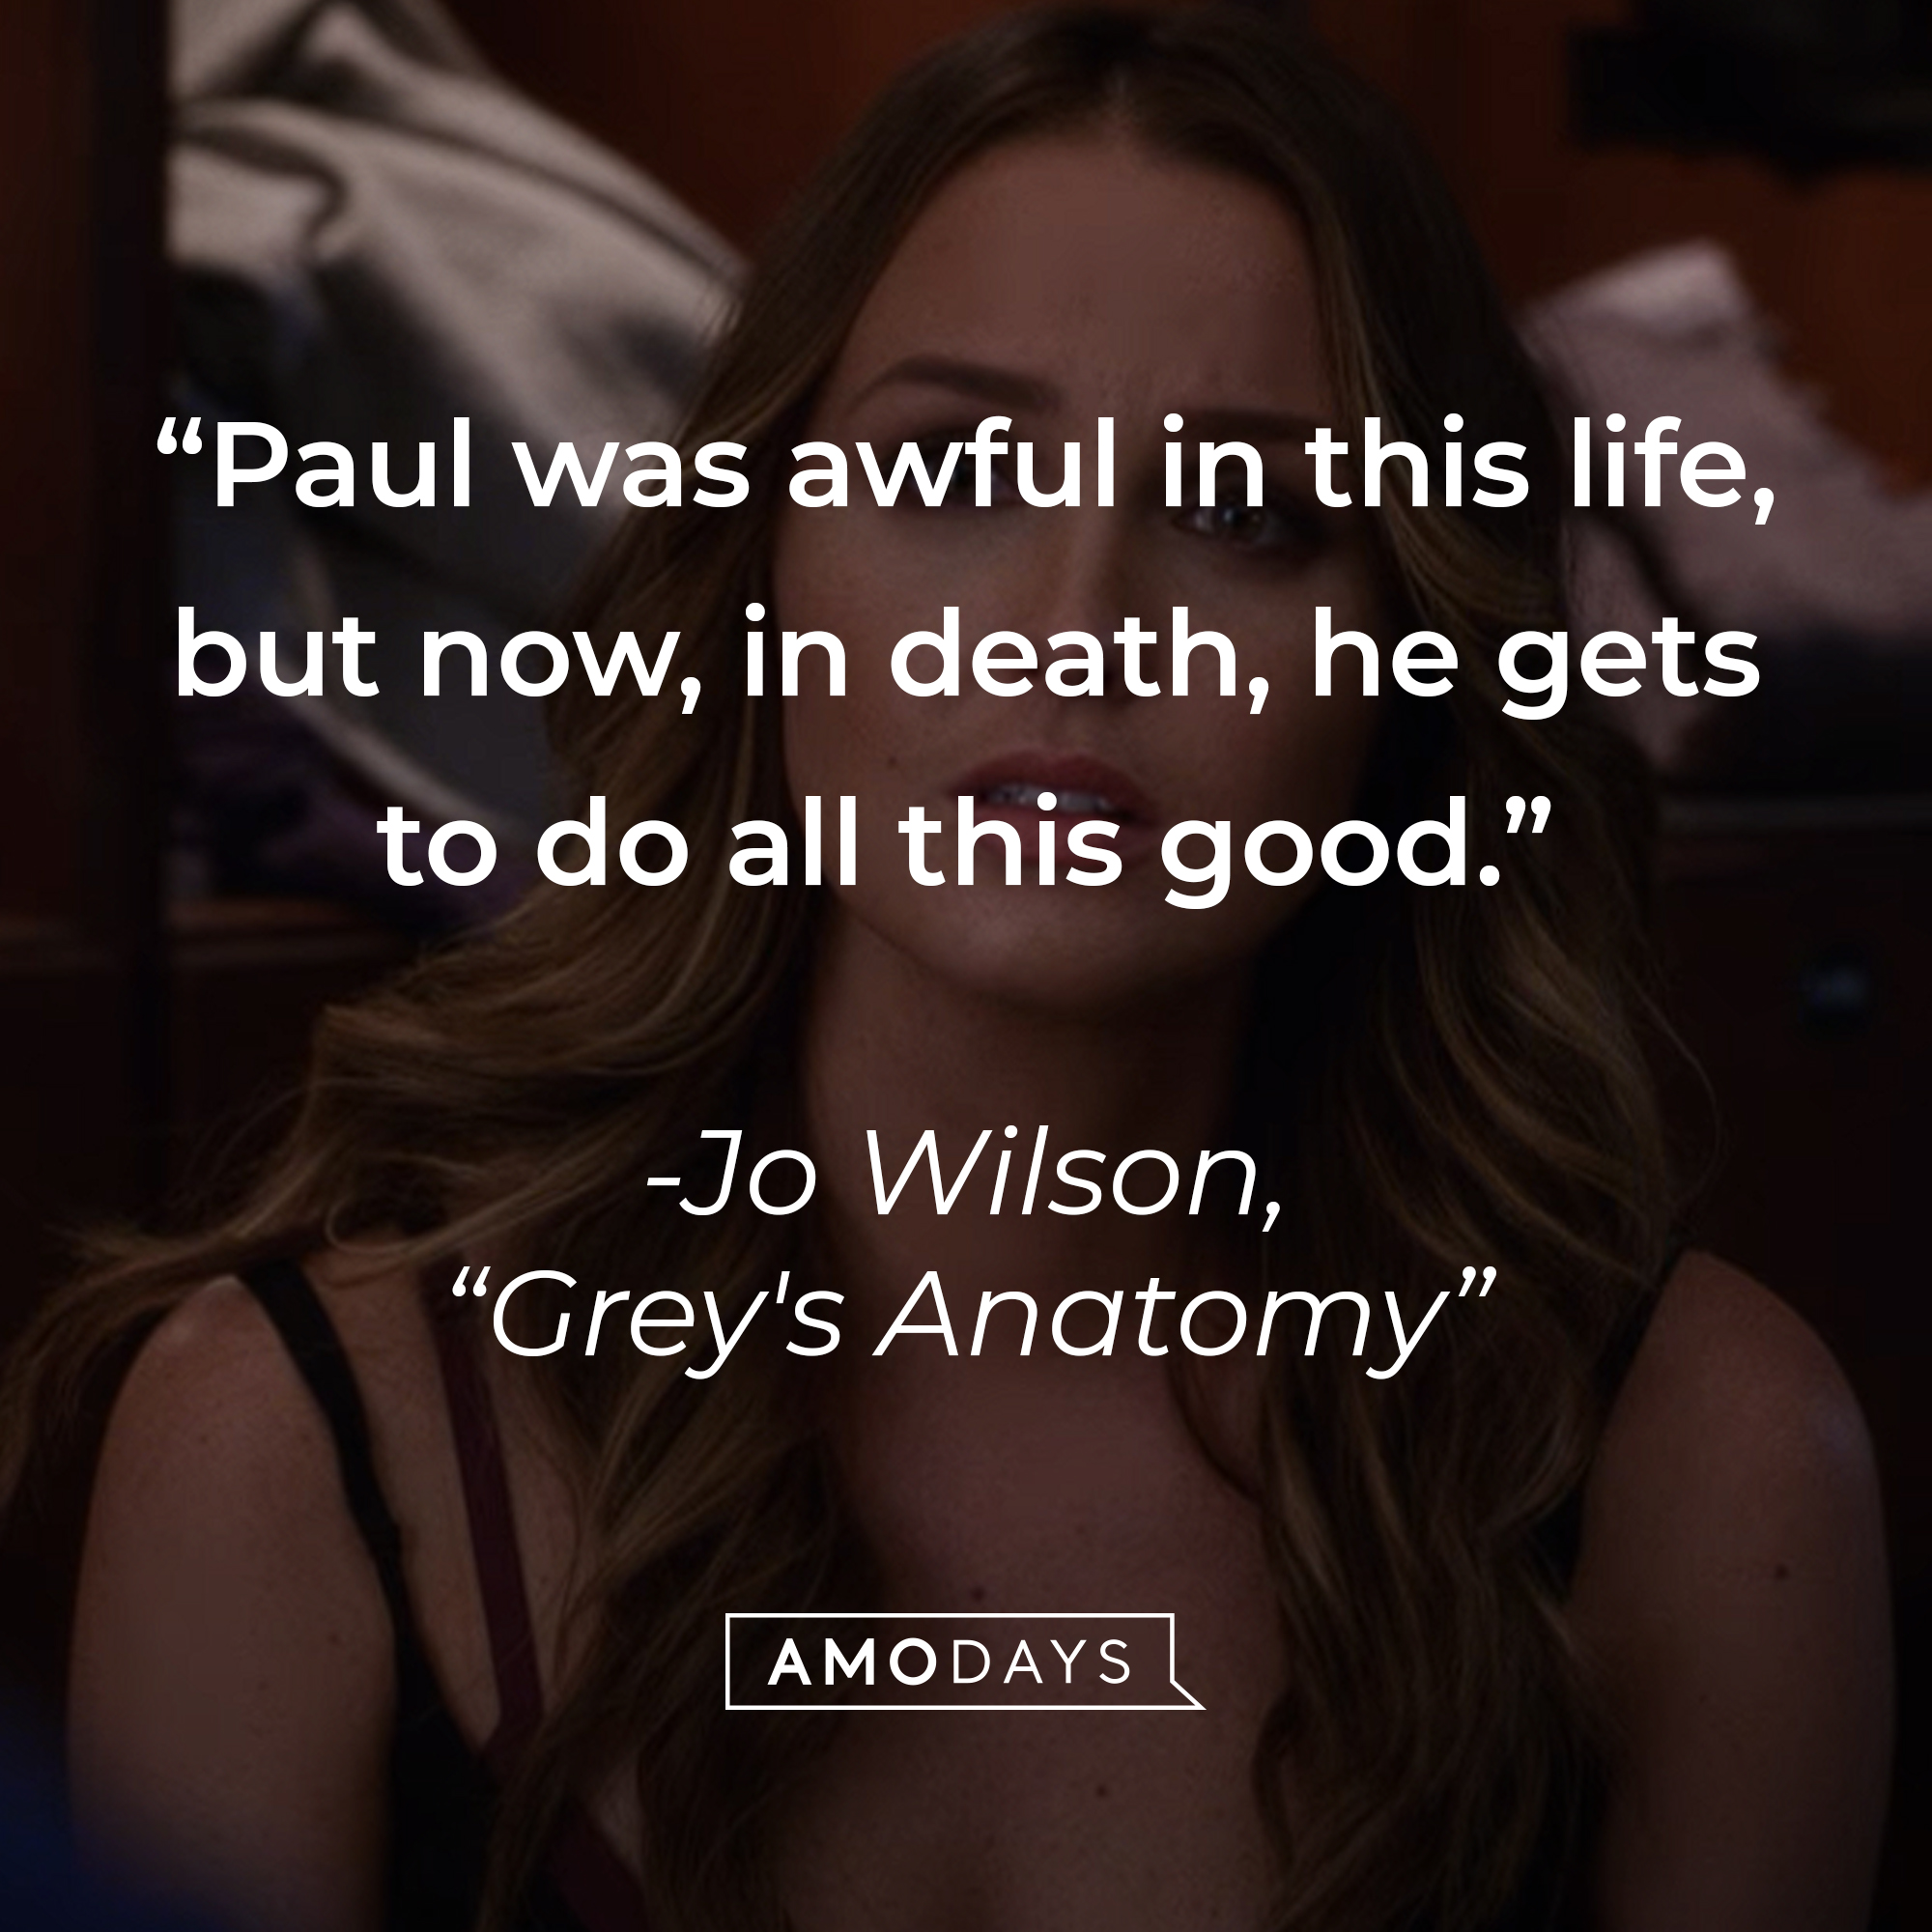 Jo Wilson’s quote from “Grey’s Anatomy”: “Paul was awful in this life, but now, in death, he gets to do all this good.” | Source: youtube.com/ABCNetwork